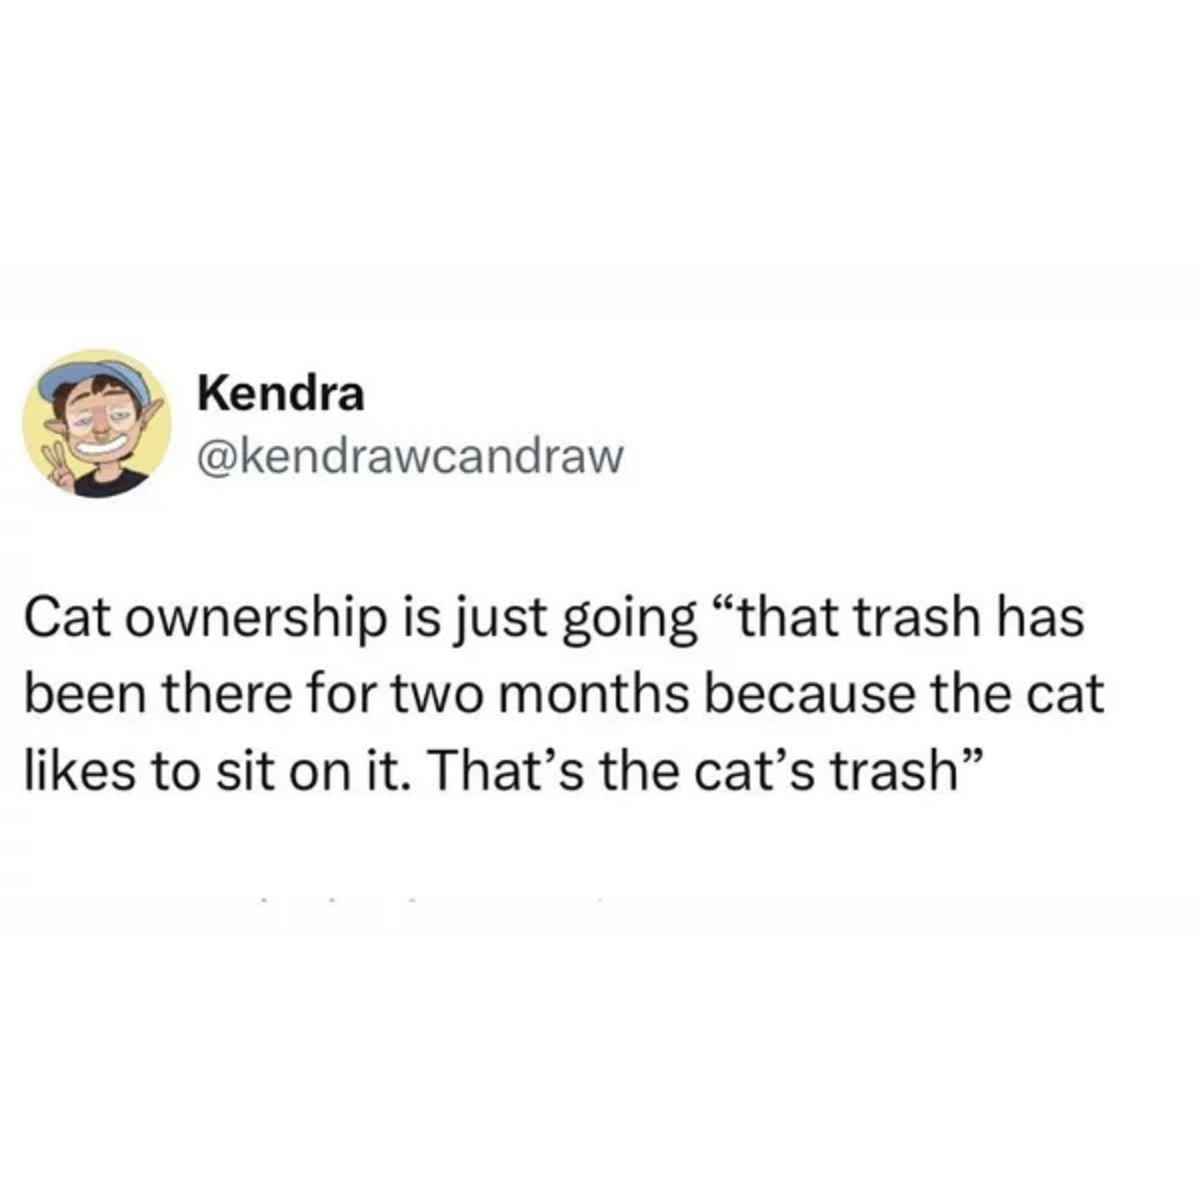 Kendra Cat ownership is just going "that trash has been there for two months because the cat to sit on it. That's the cat's trash"